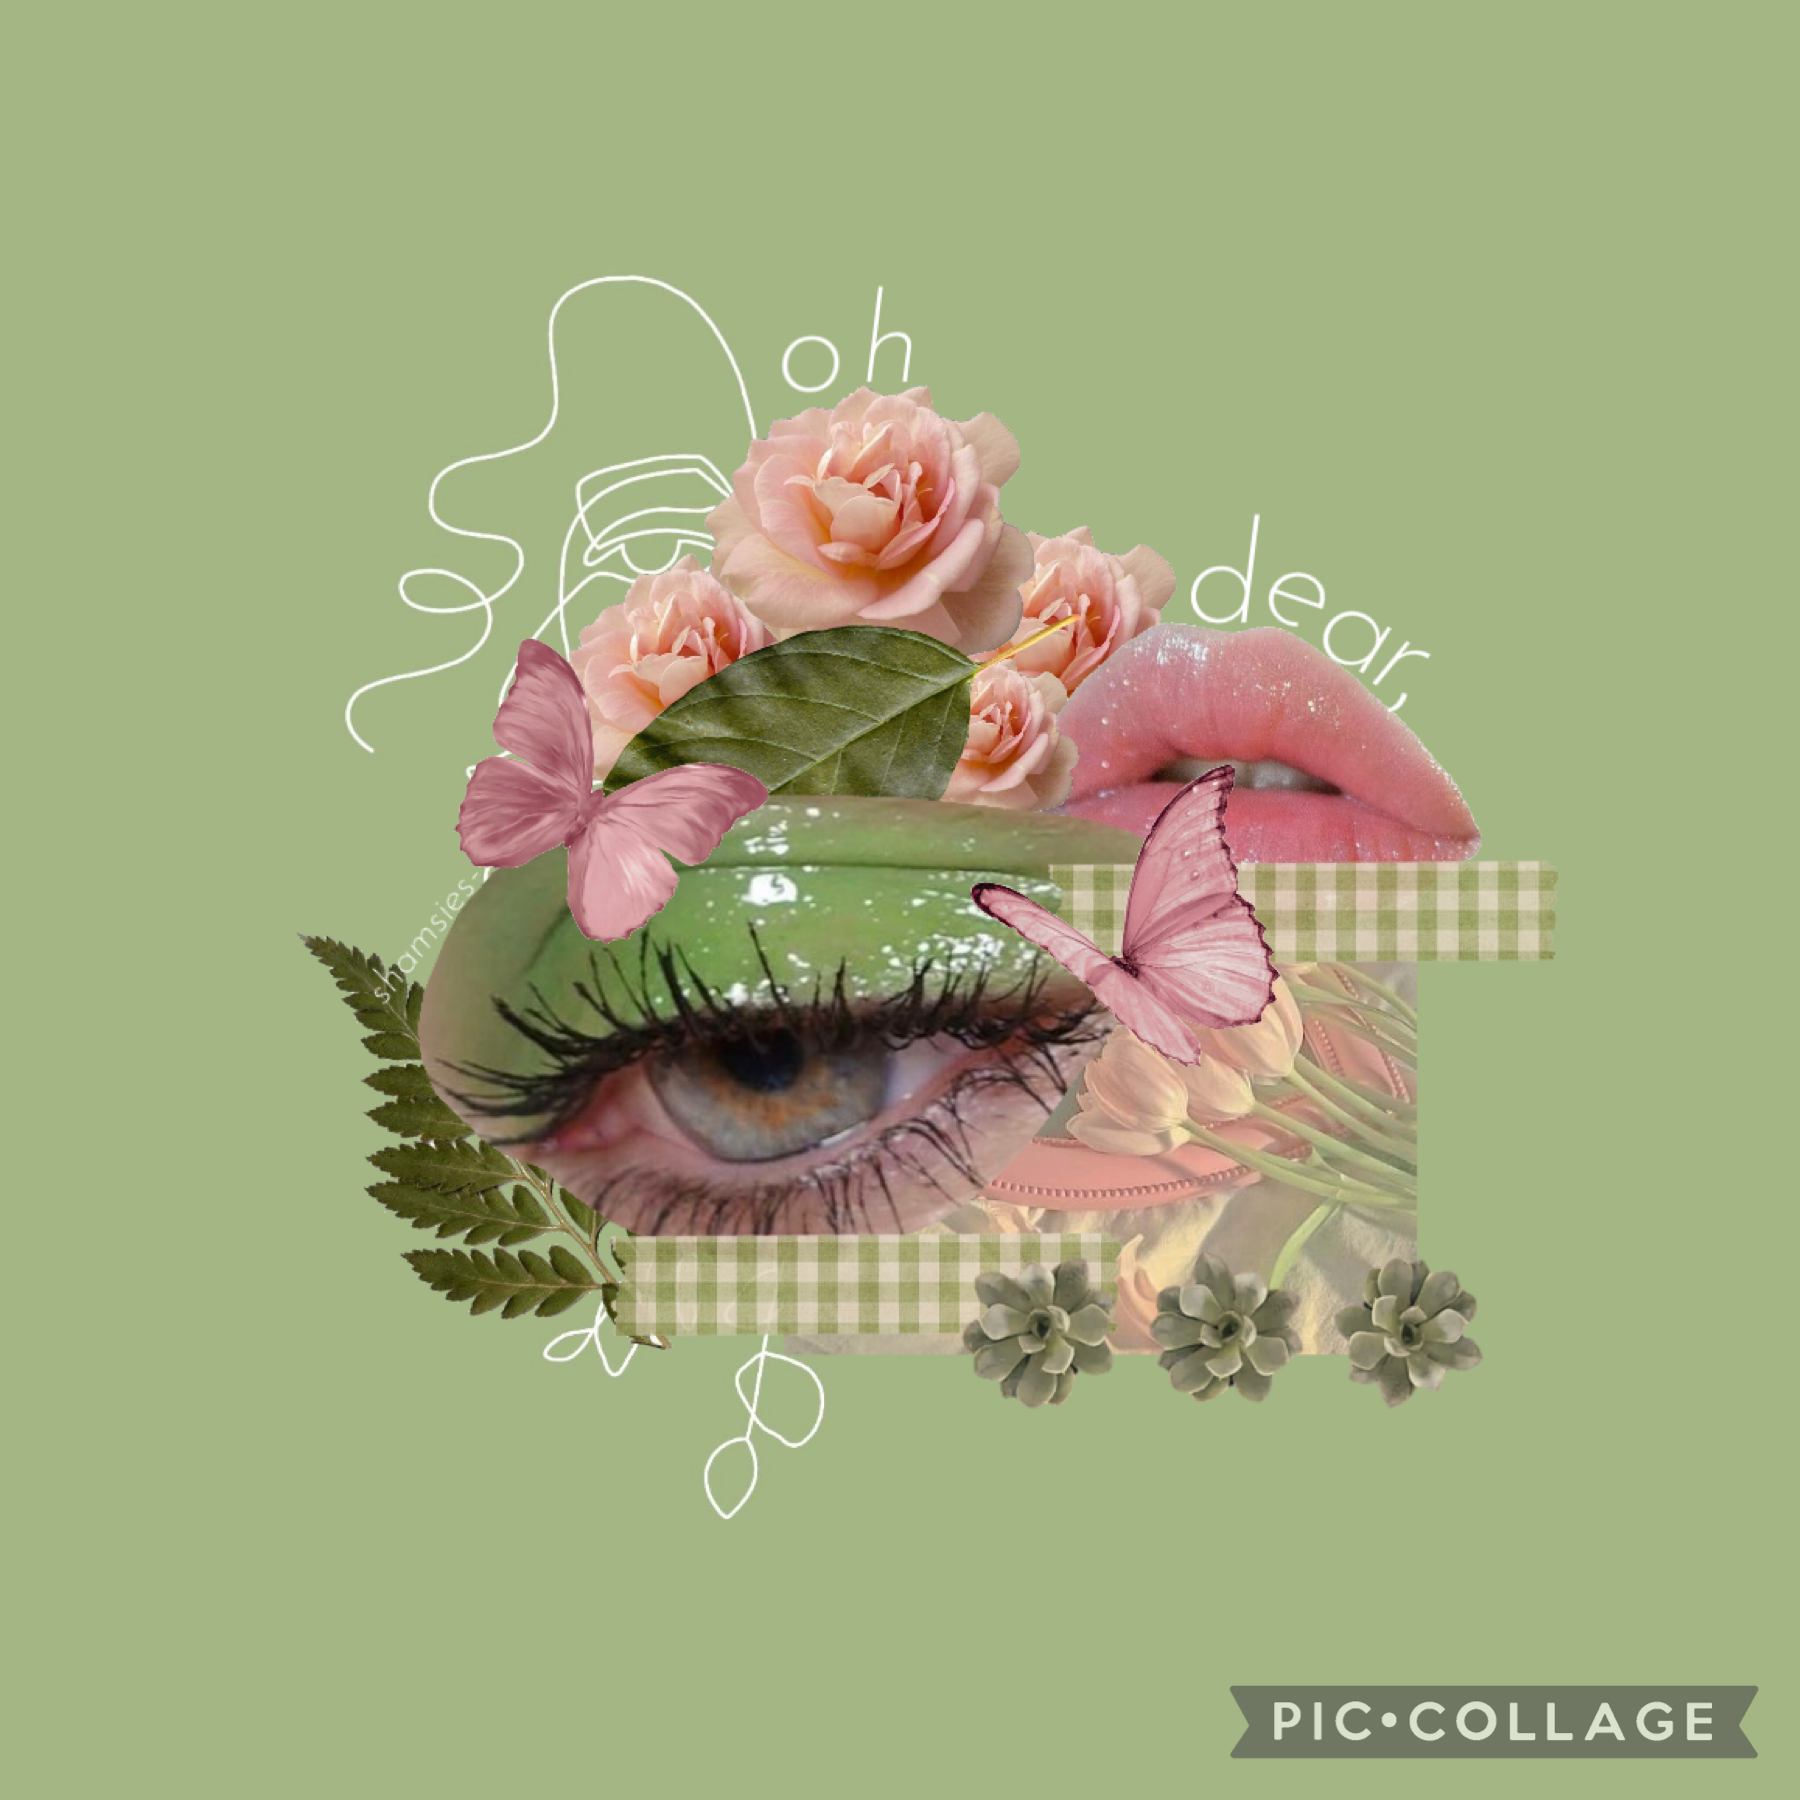 (inspo: -Blinded-) heyyy, i dont rlly have a schedule abt when to post sorryyy, but im hope to post once a week so ye, anywyas i might do collages like this more who knows :))